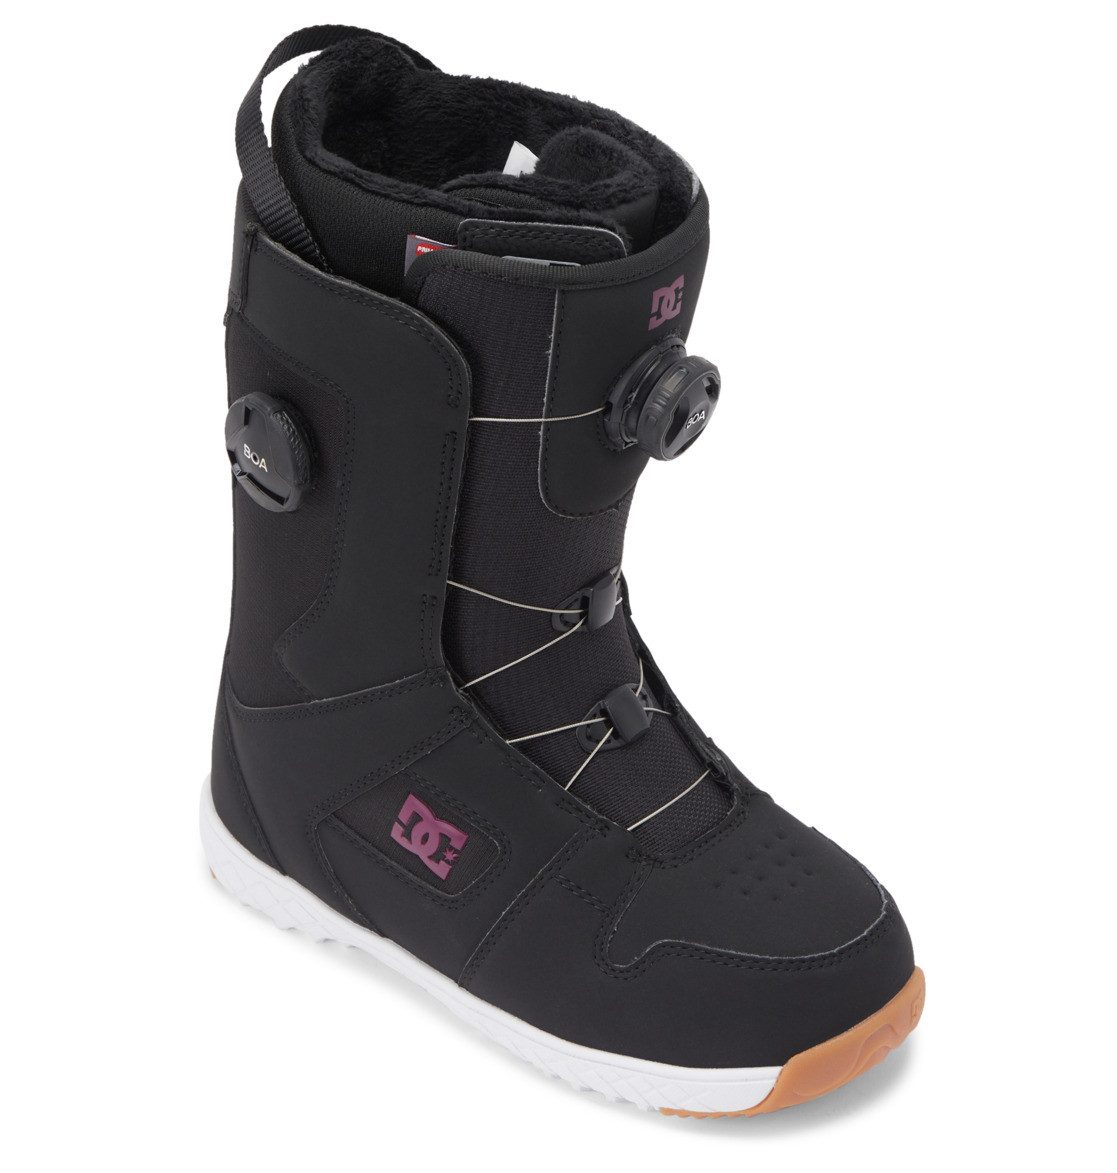 DC Shoes Phase Pro Snowboardboots